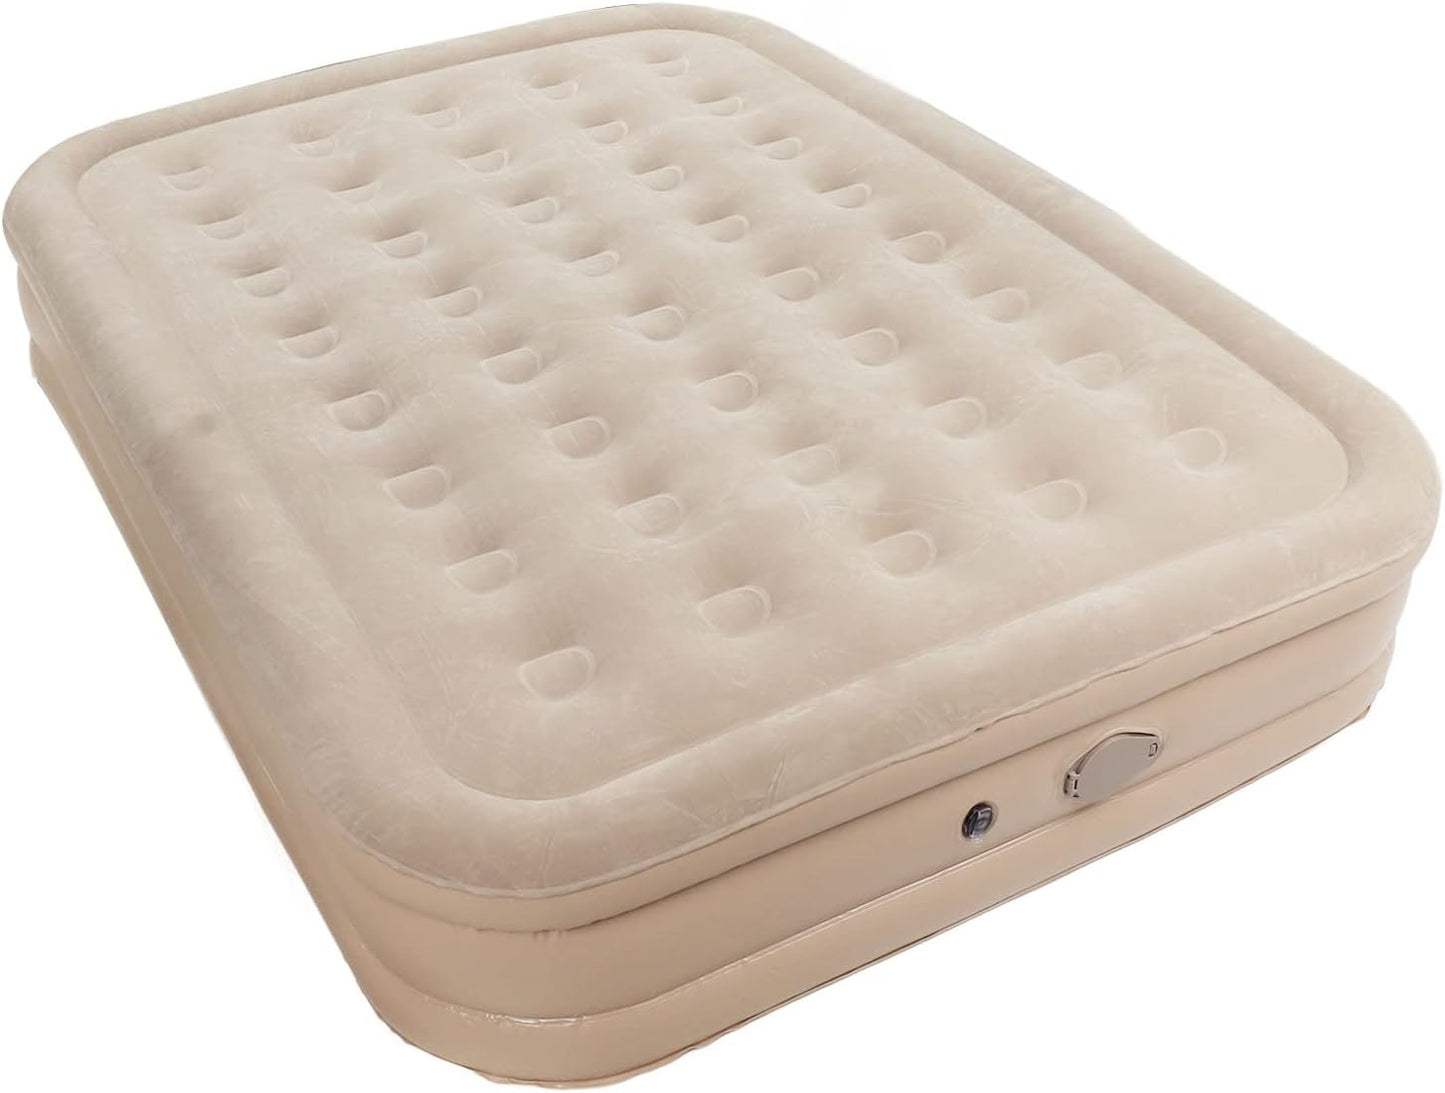 Ultimate Comfort: Premium Automatic Inflatable Airbed